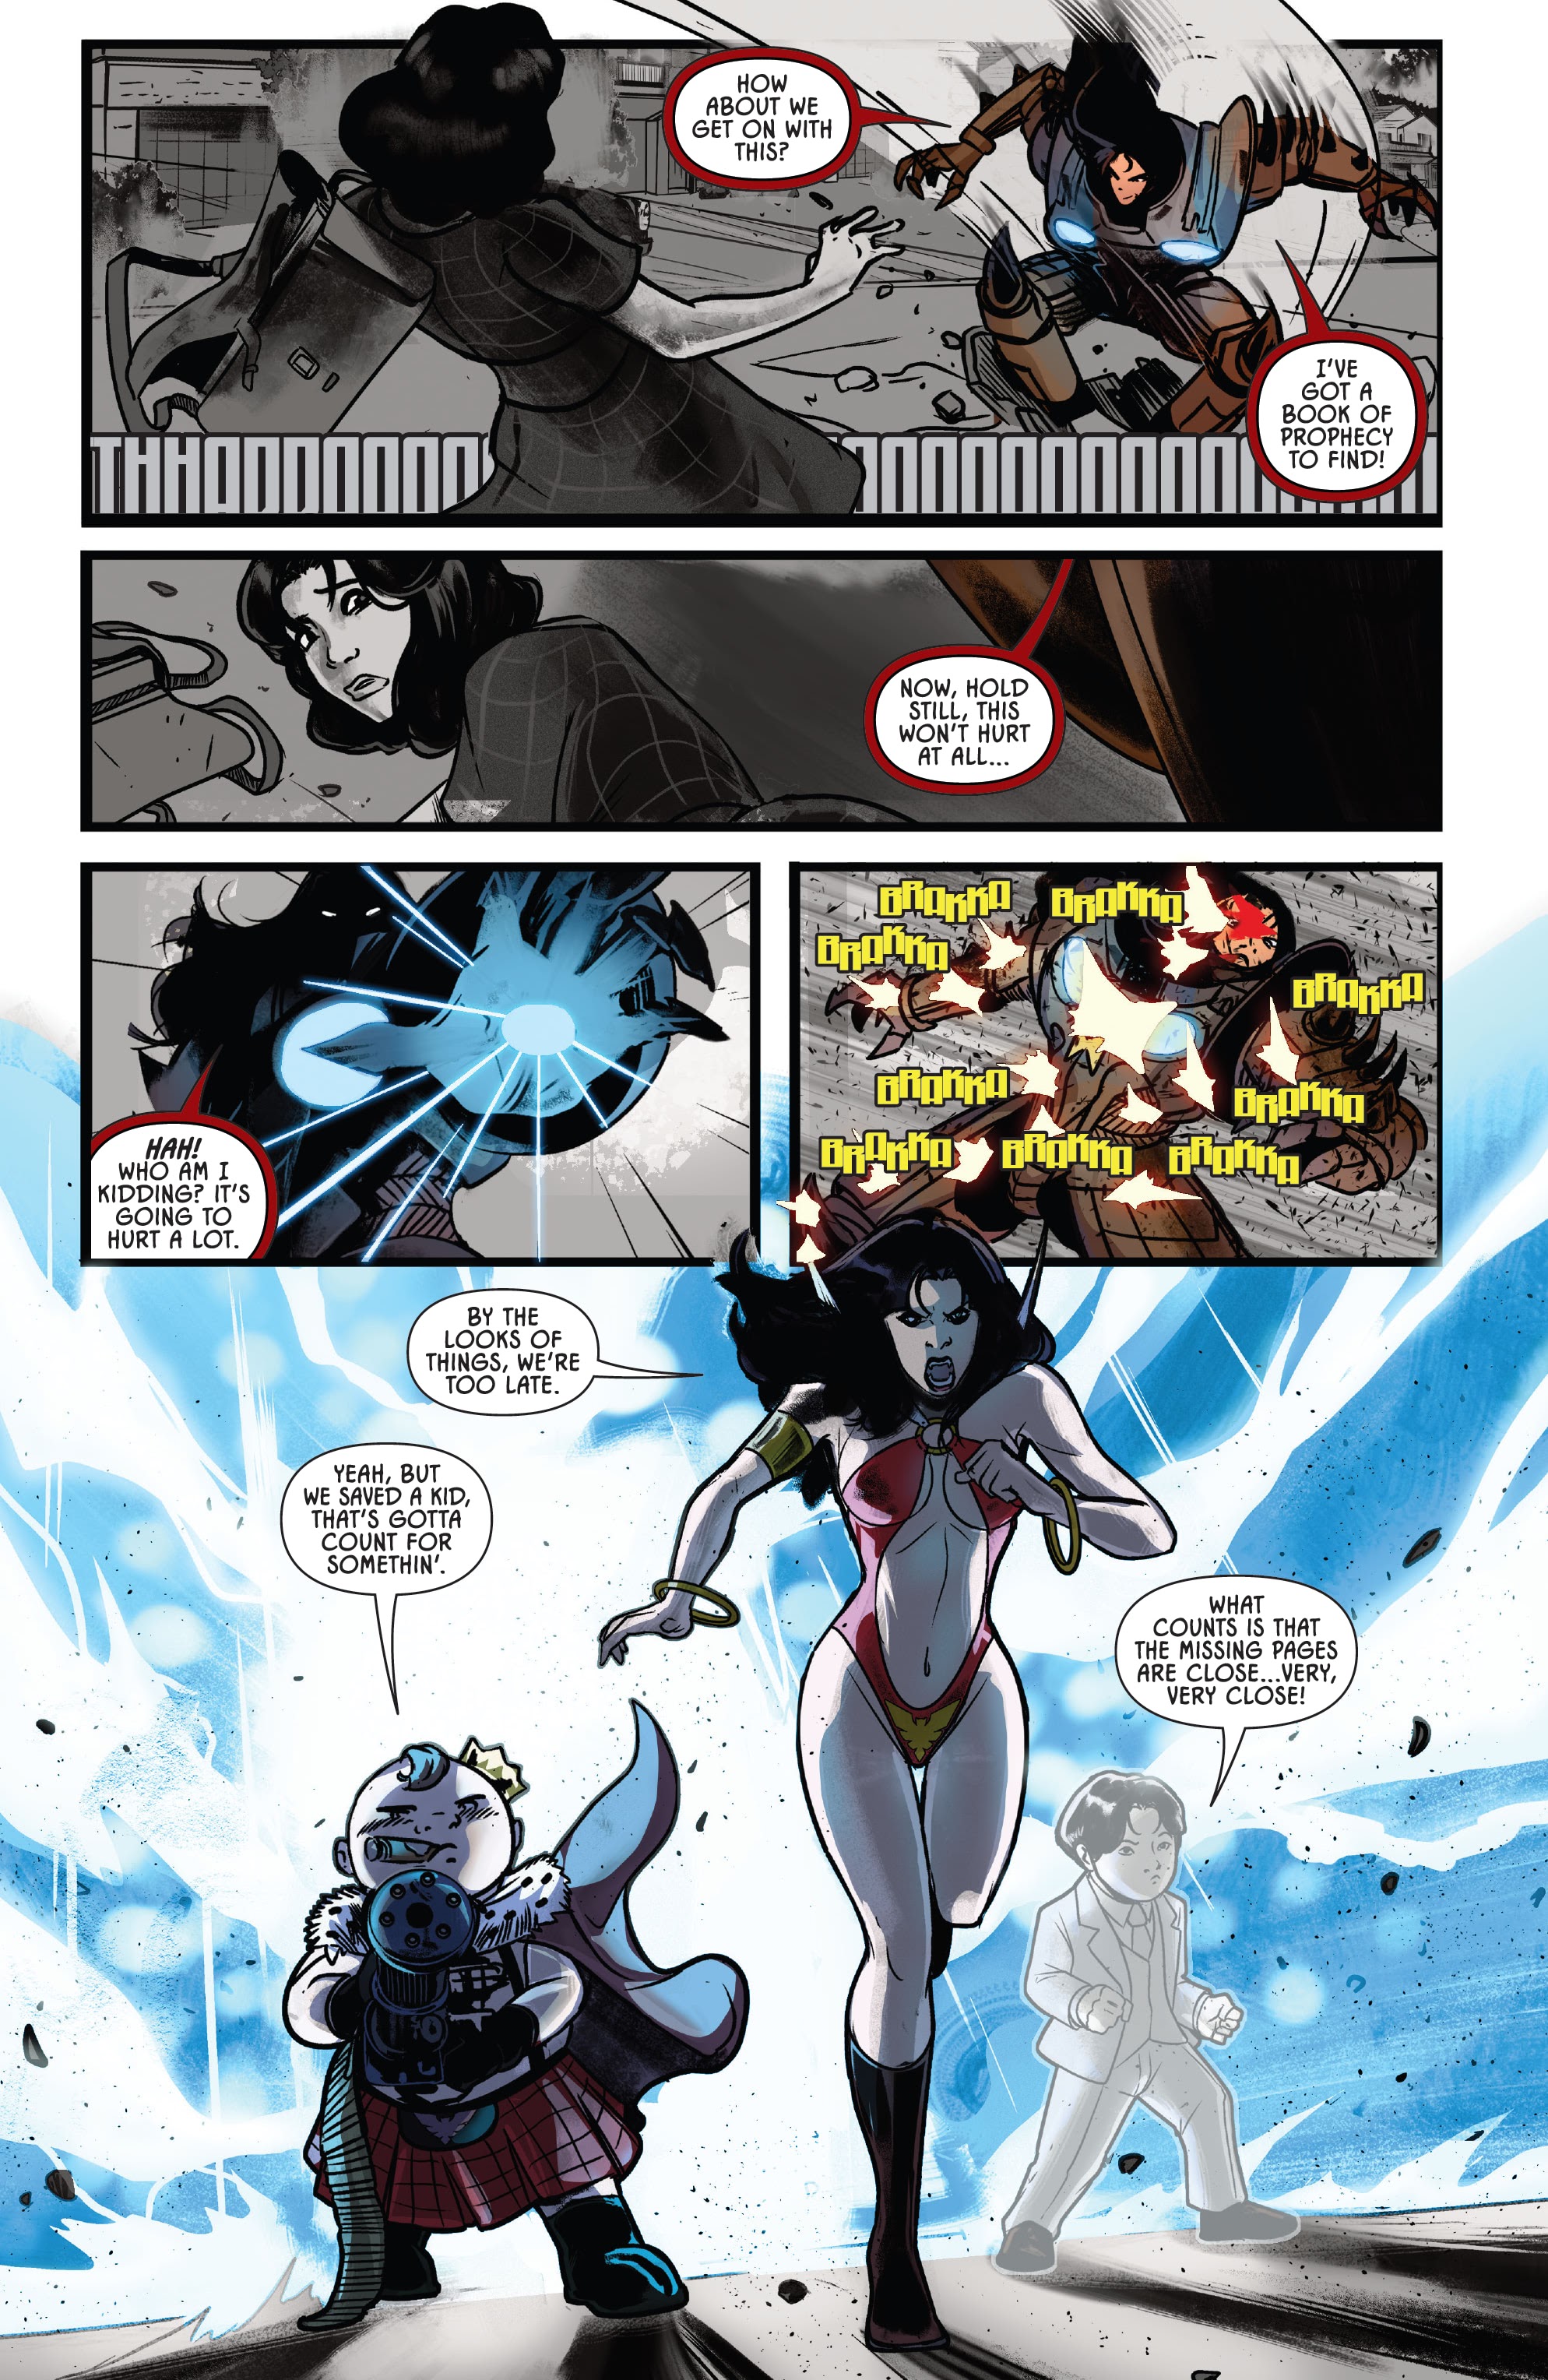 Read online Vampiverse comic -  Issue #3 - 12